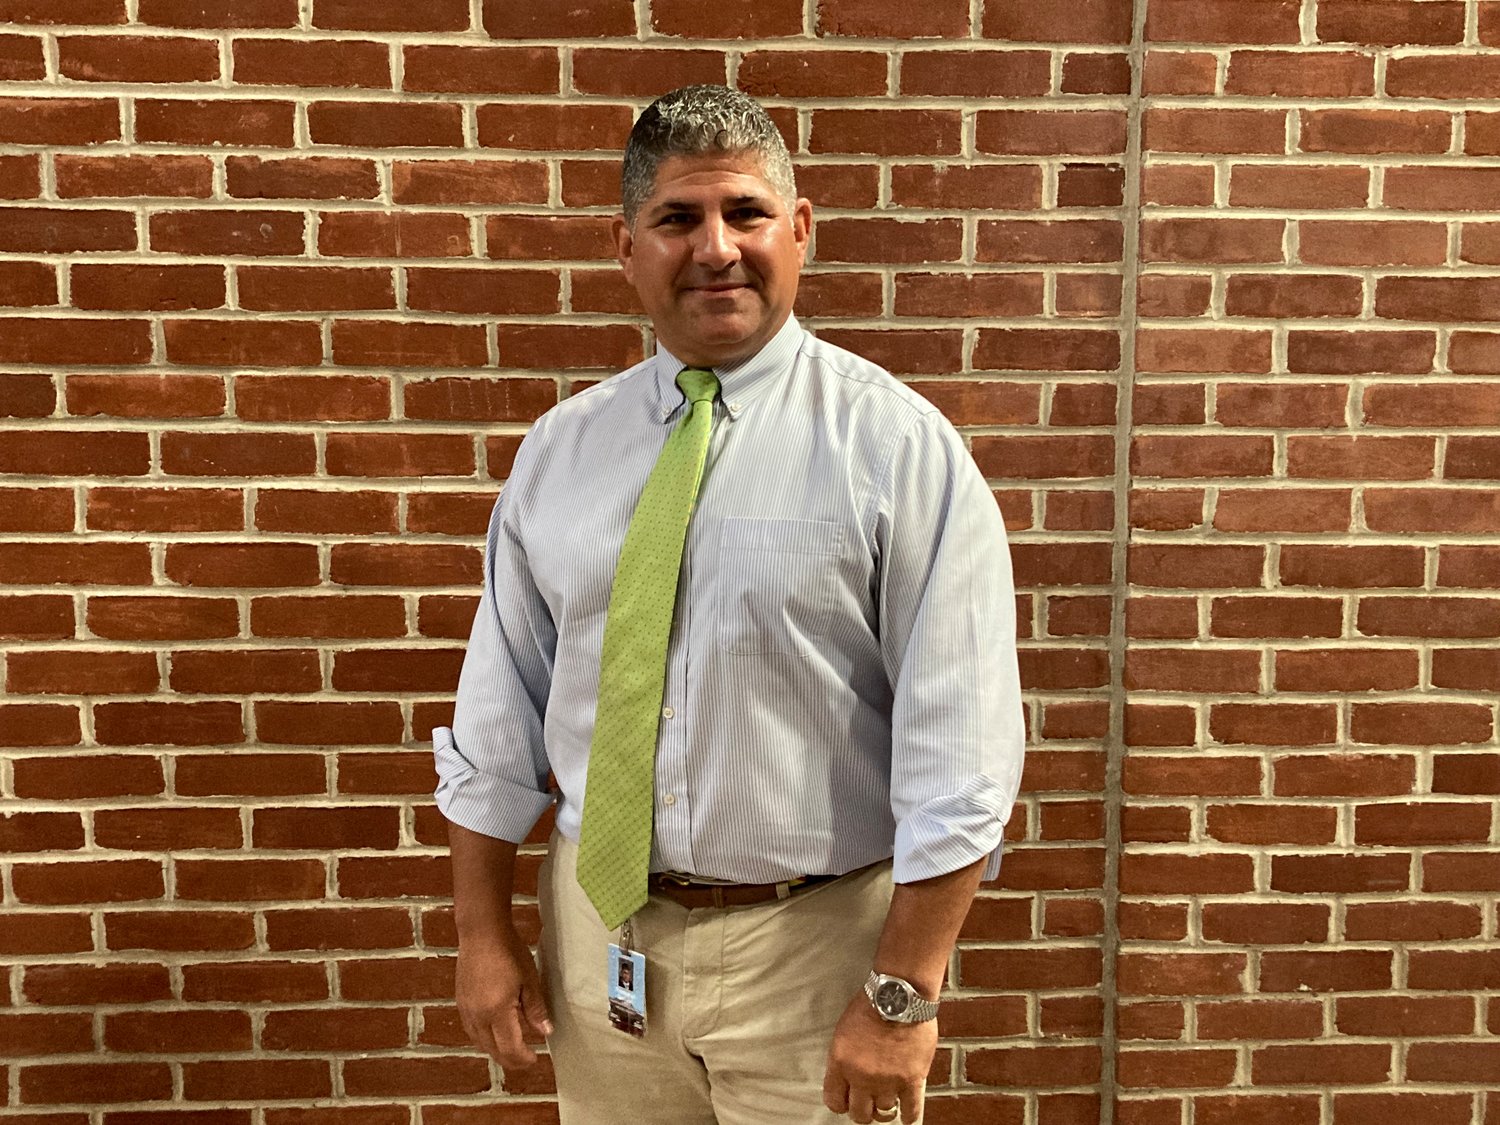 OFF TO EAST: Cranston West Principal Thomas Barbieri will be reassigned to Cranston East this fall as the principal. Barbieri started his career in Cranston Public Schools in 1991 at East and looks forward to going back.